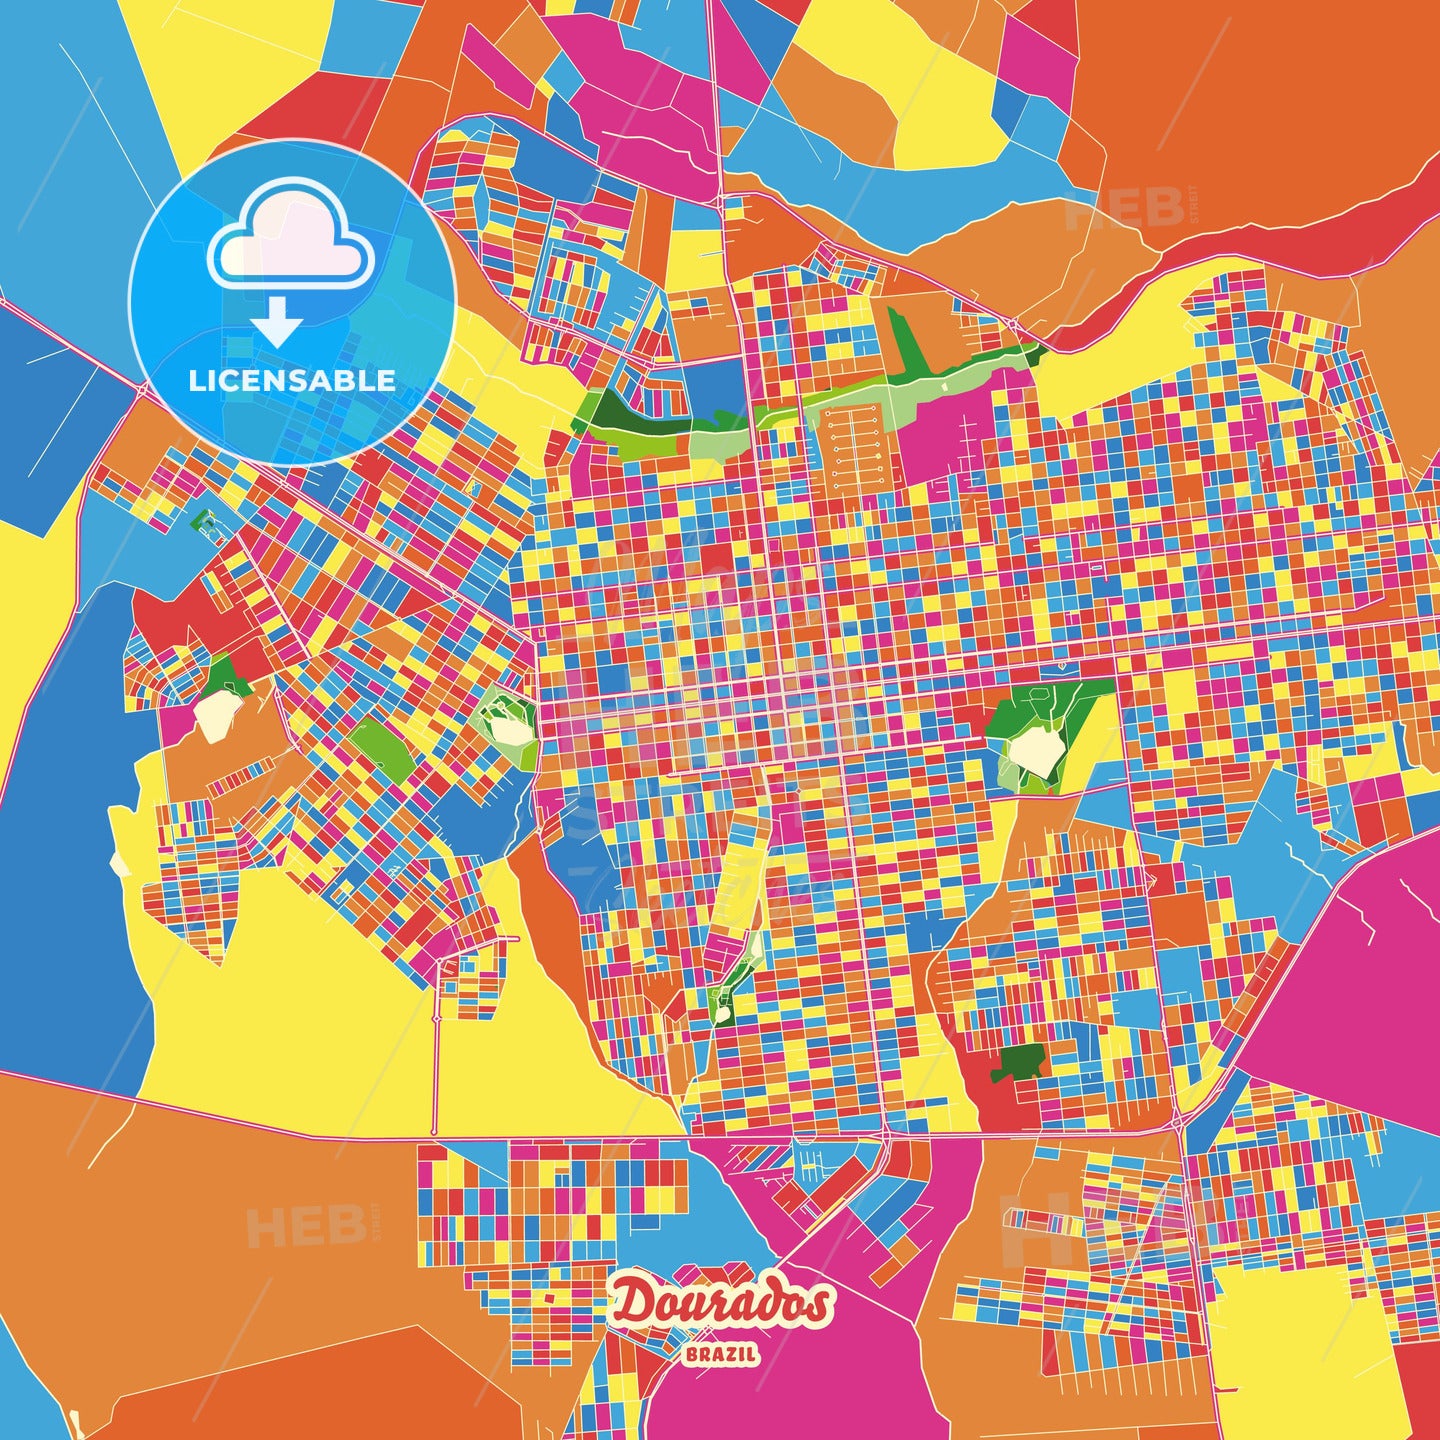 Dourados, Brazil Crazy Colorful Street Map Poster Template - HEBSTREITS Sketches